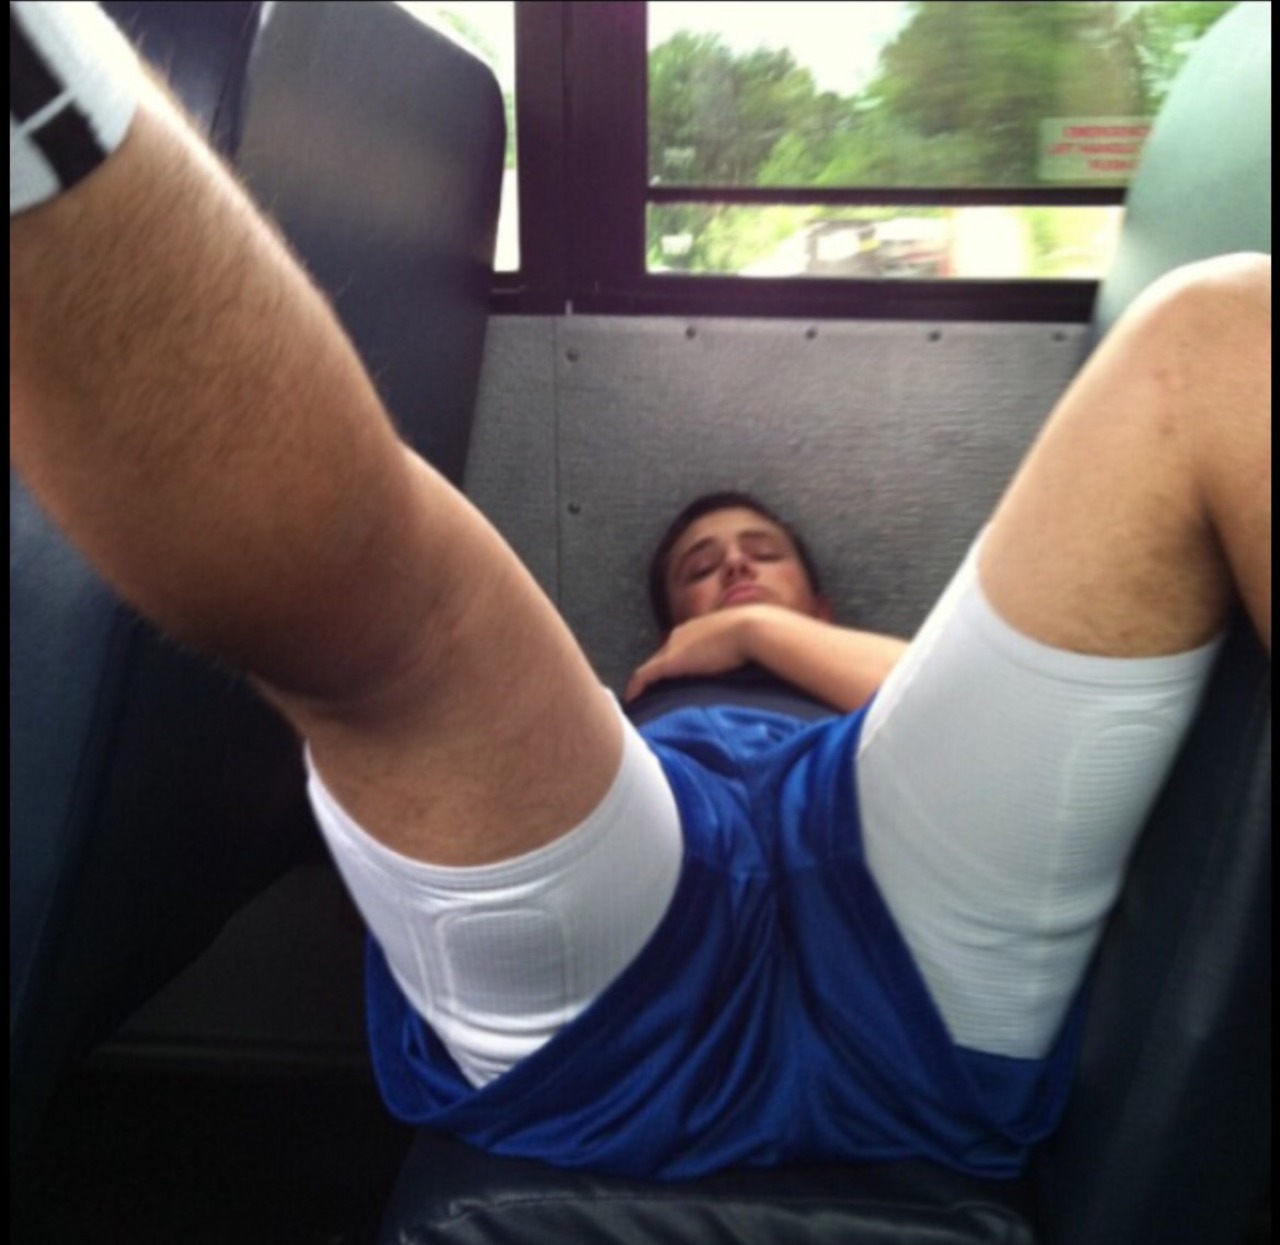 compression-shorts1:  It would be hard not to start jerking right there on the bus